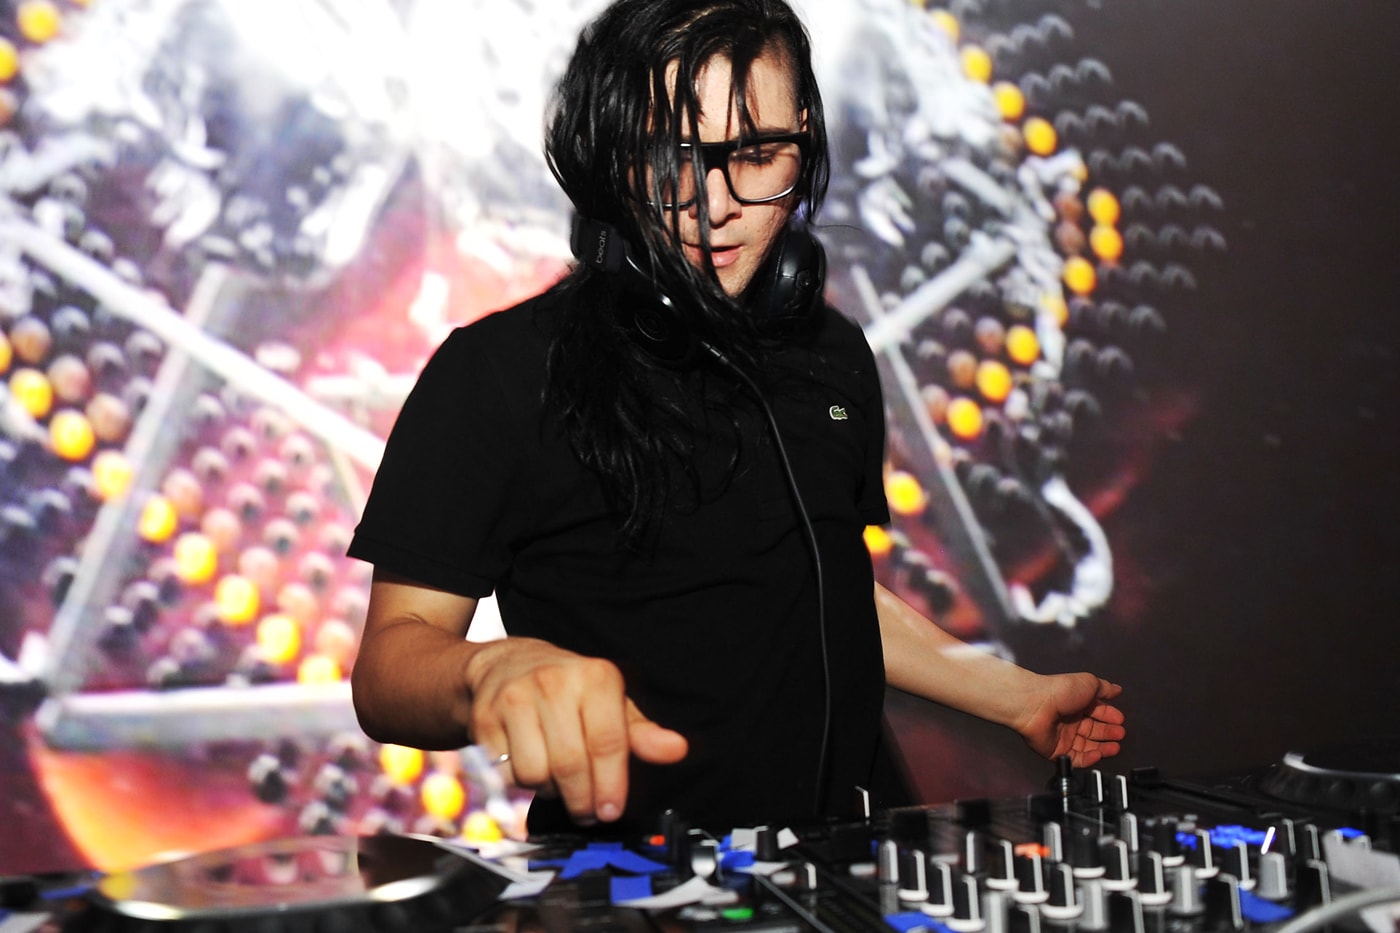 Skrillex Shares First Song with From First to Last in 10 Years, "Make War"